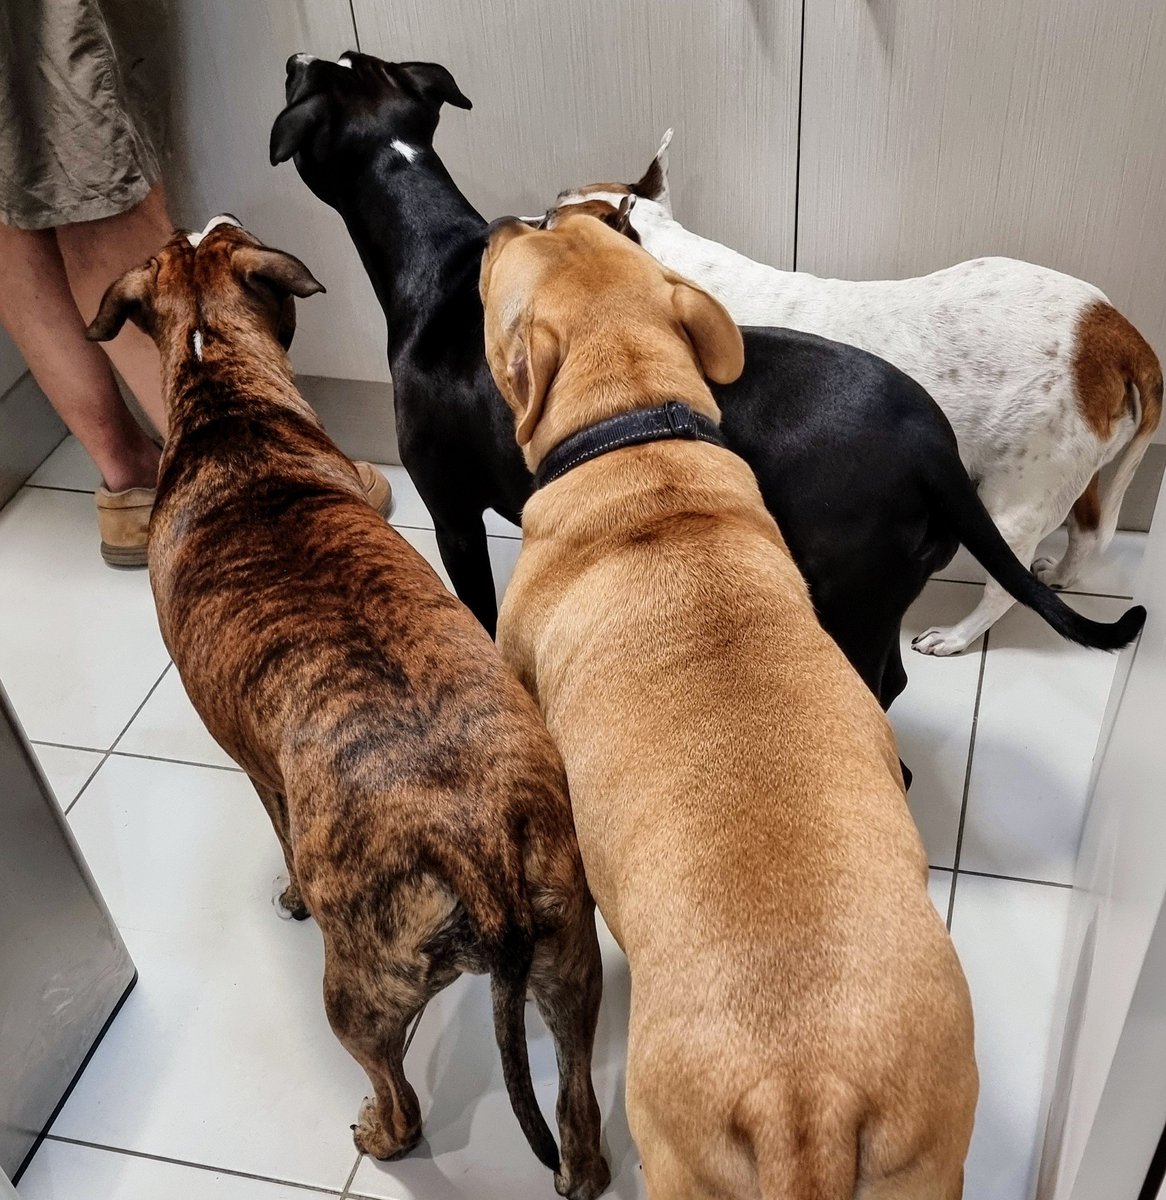 Every morning we all line up for our Glyde Mobility Chews, so we will have healthy joints! 😋 ♥ #staffy #staffie #amstaff #doglife #Glyde